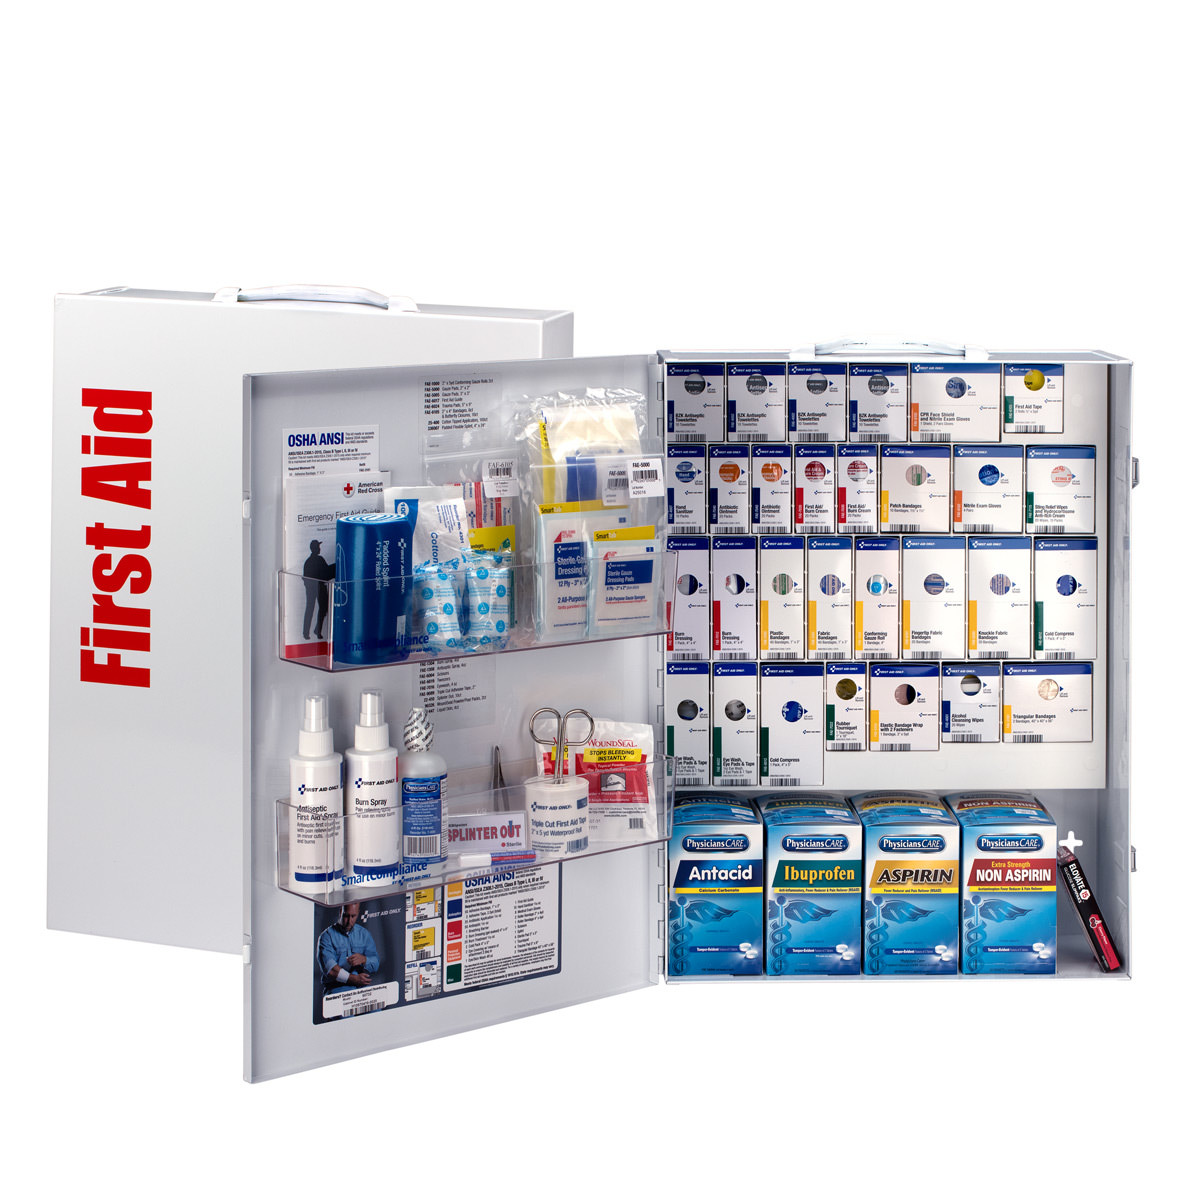 ANSI 2015 SmartCompliance First Aid Kit for 150 People, 925 Pieces